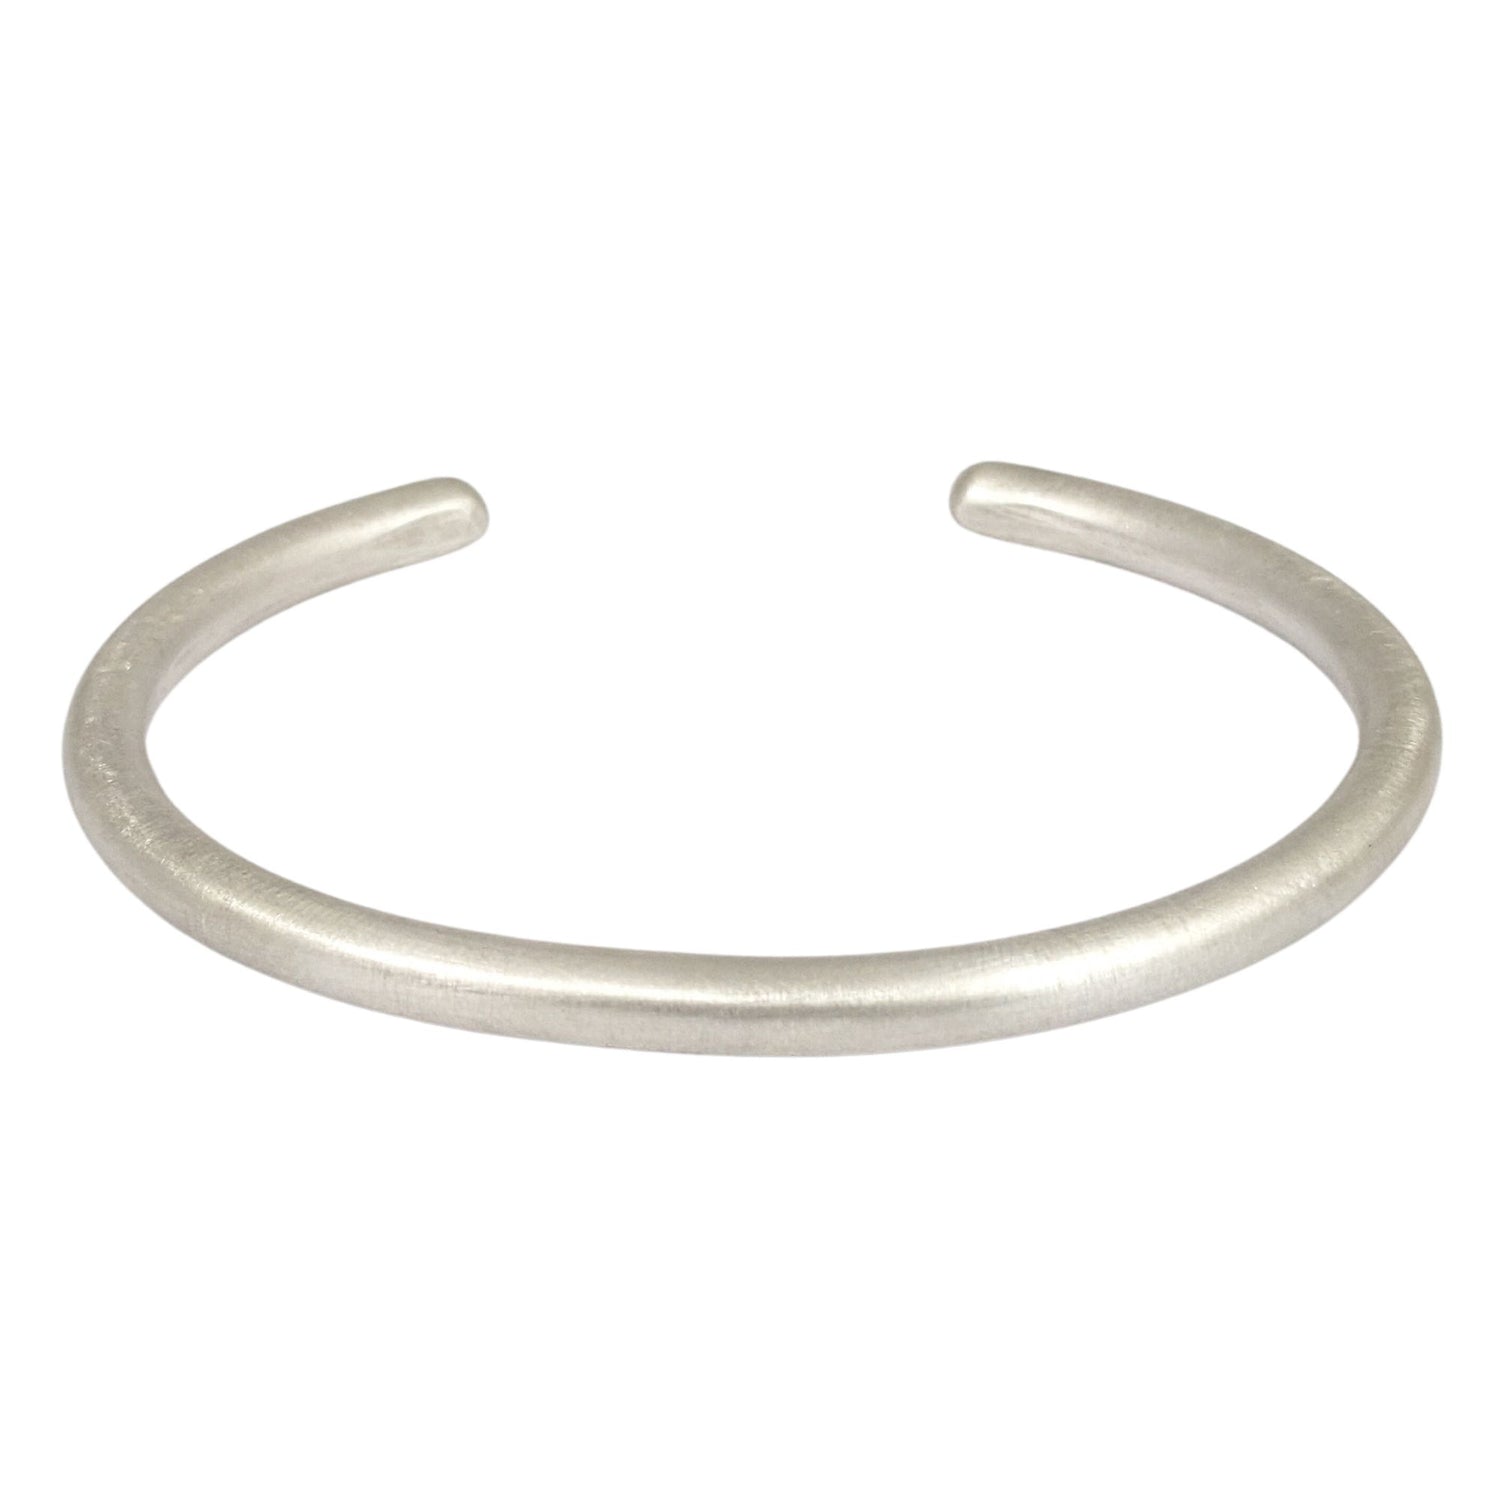 Heavy round sterling silver wire cuff bracelet.  For men or large wrist.